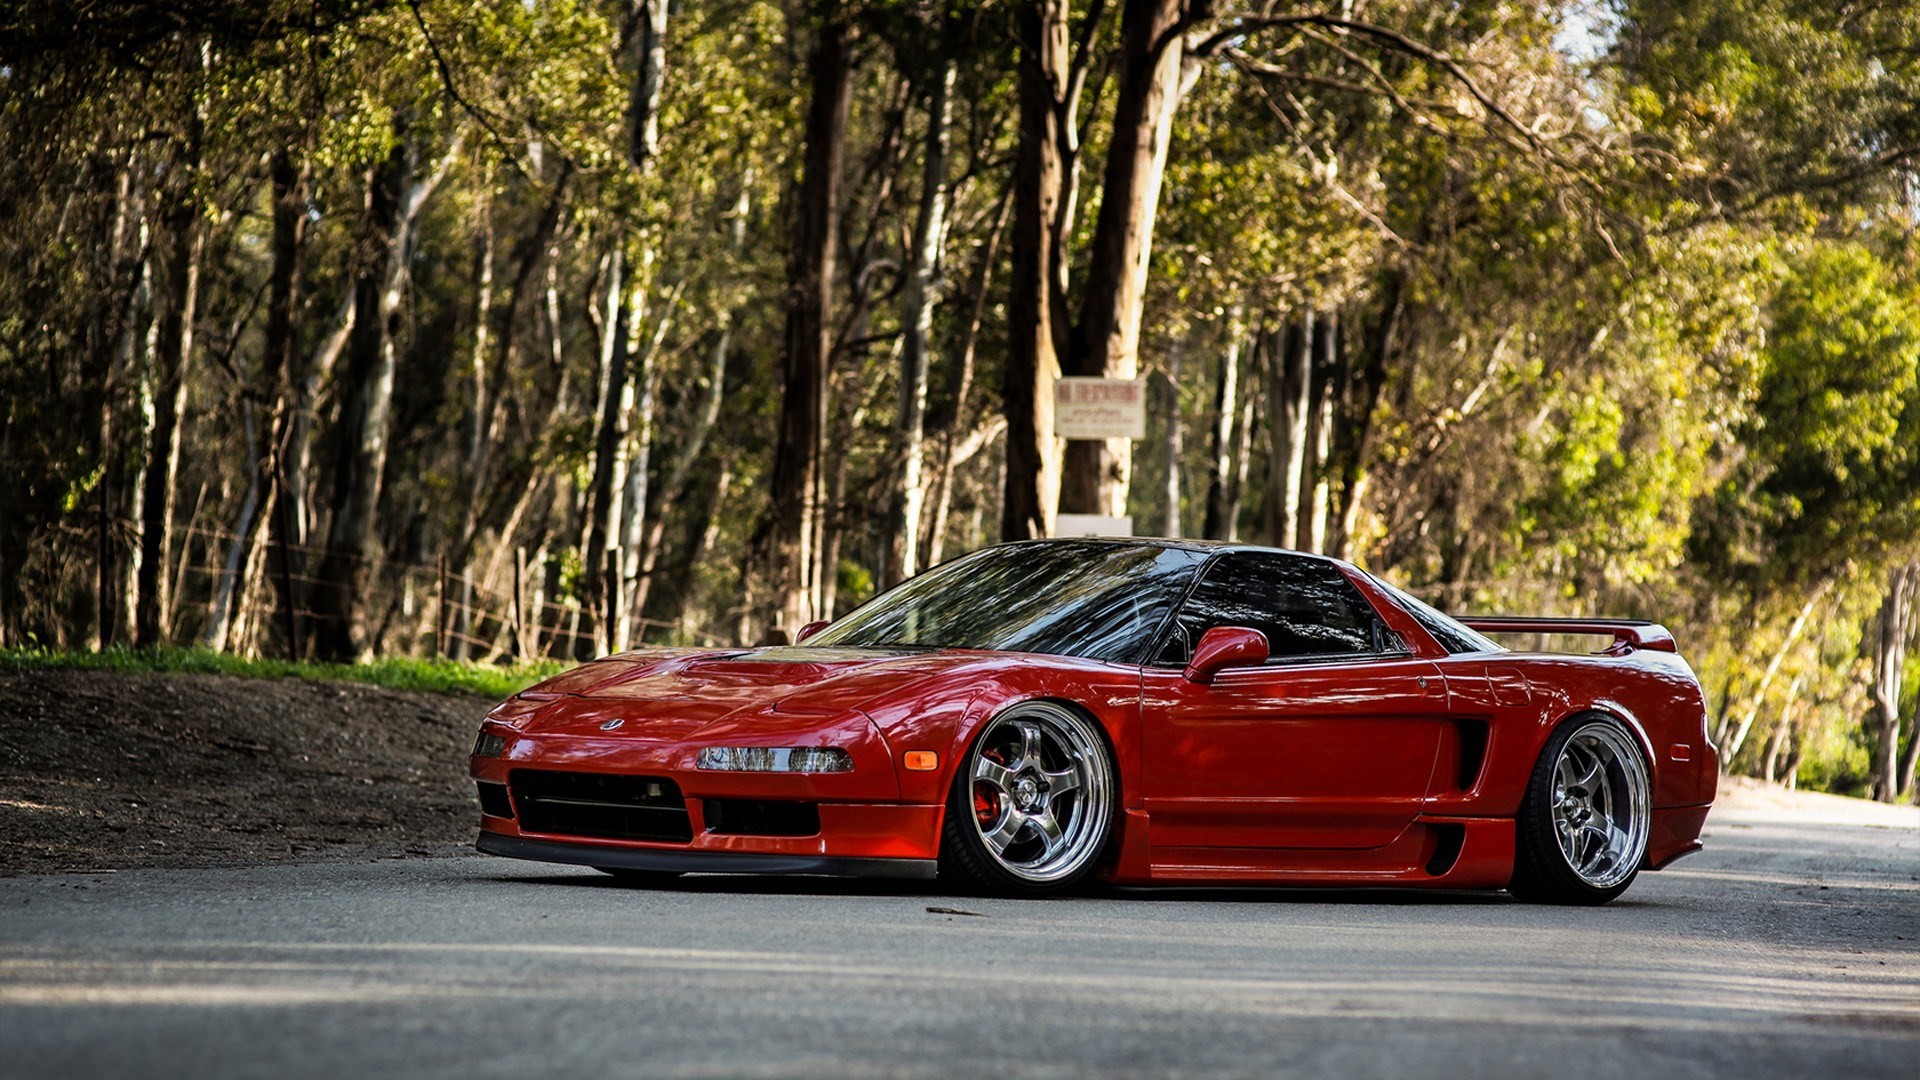 Acura Nsx Backgrounds Free Download HD Wallpapers Desktop Images